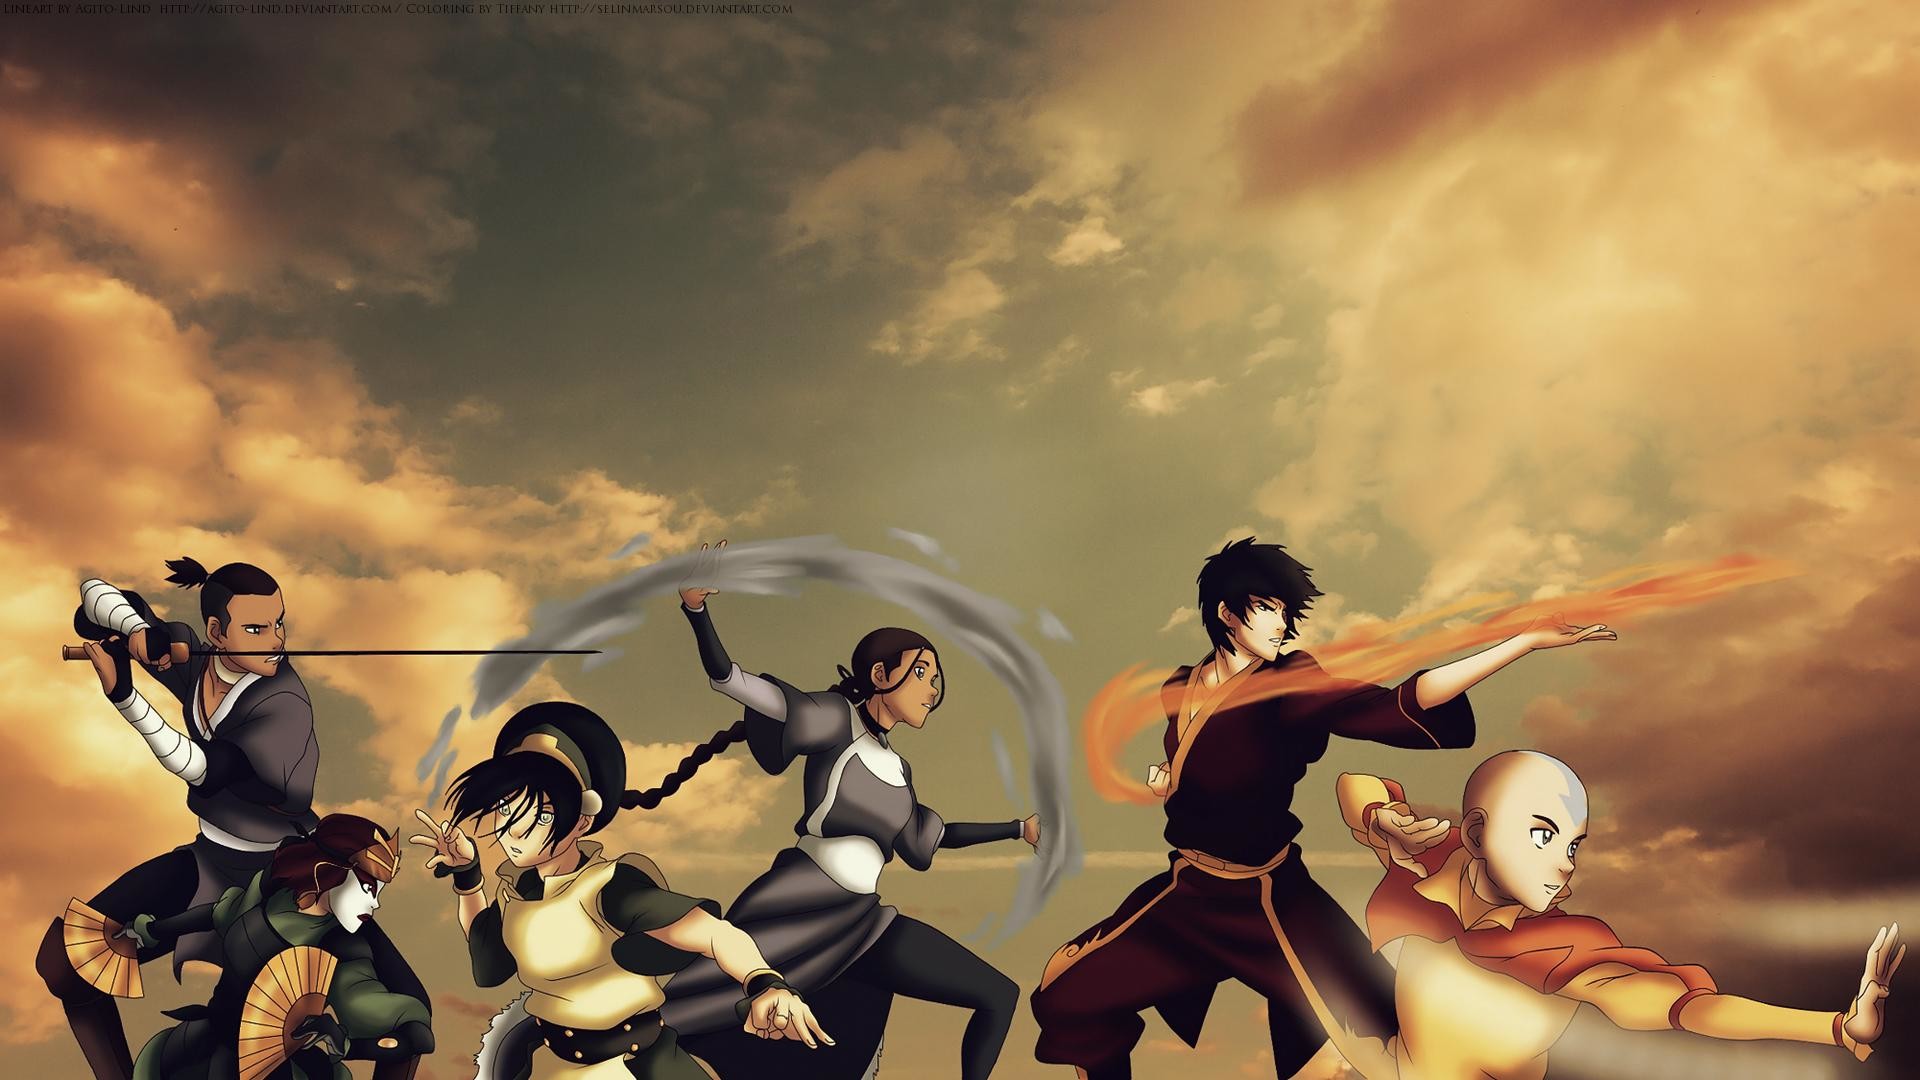 1920x1080 Avatar The Last Airbender Backgrounds - Wallpaper Cave